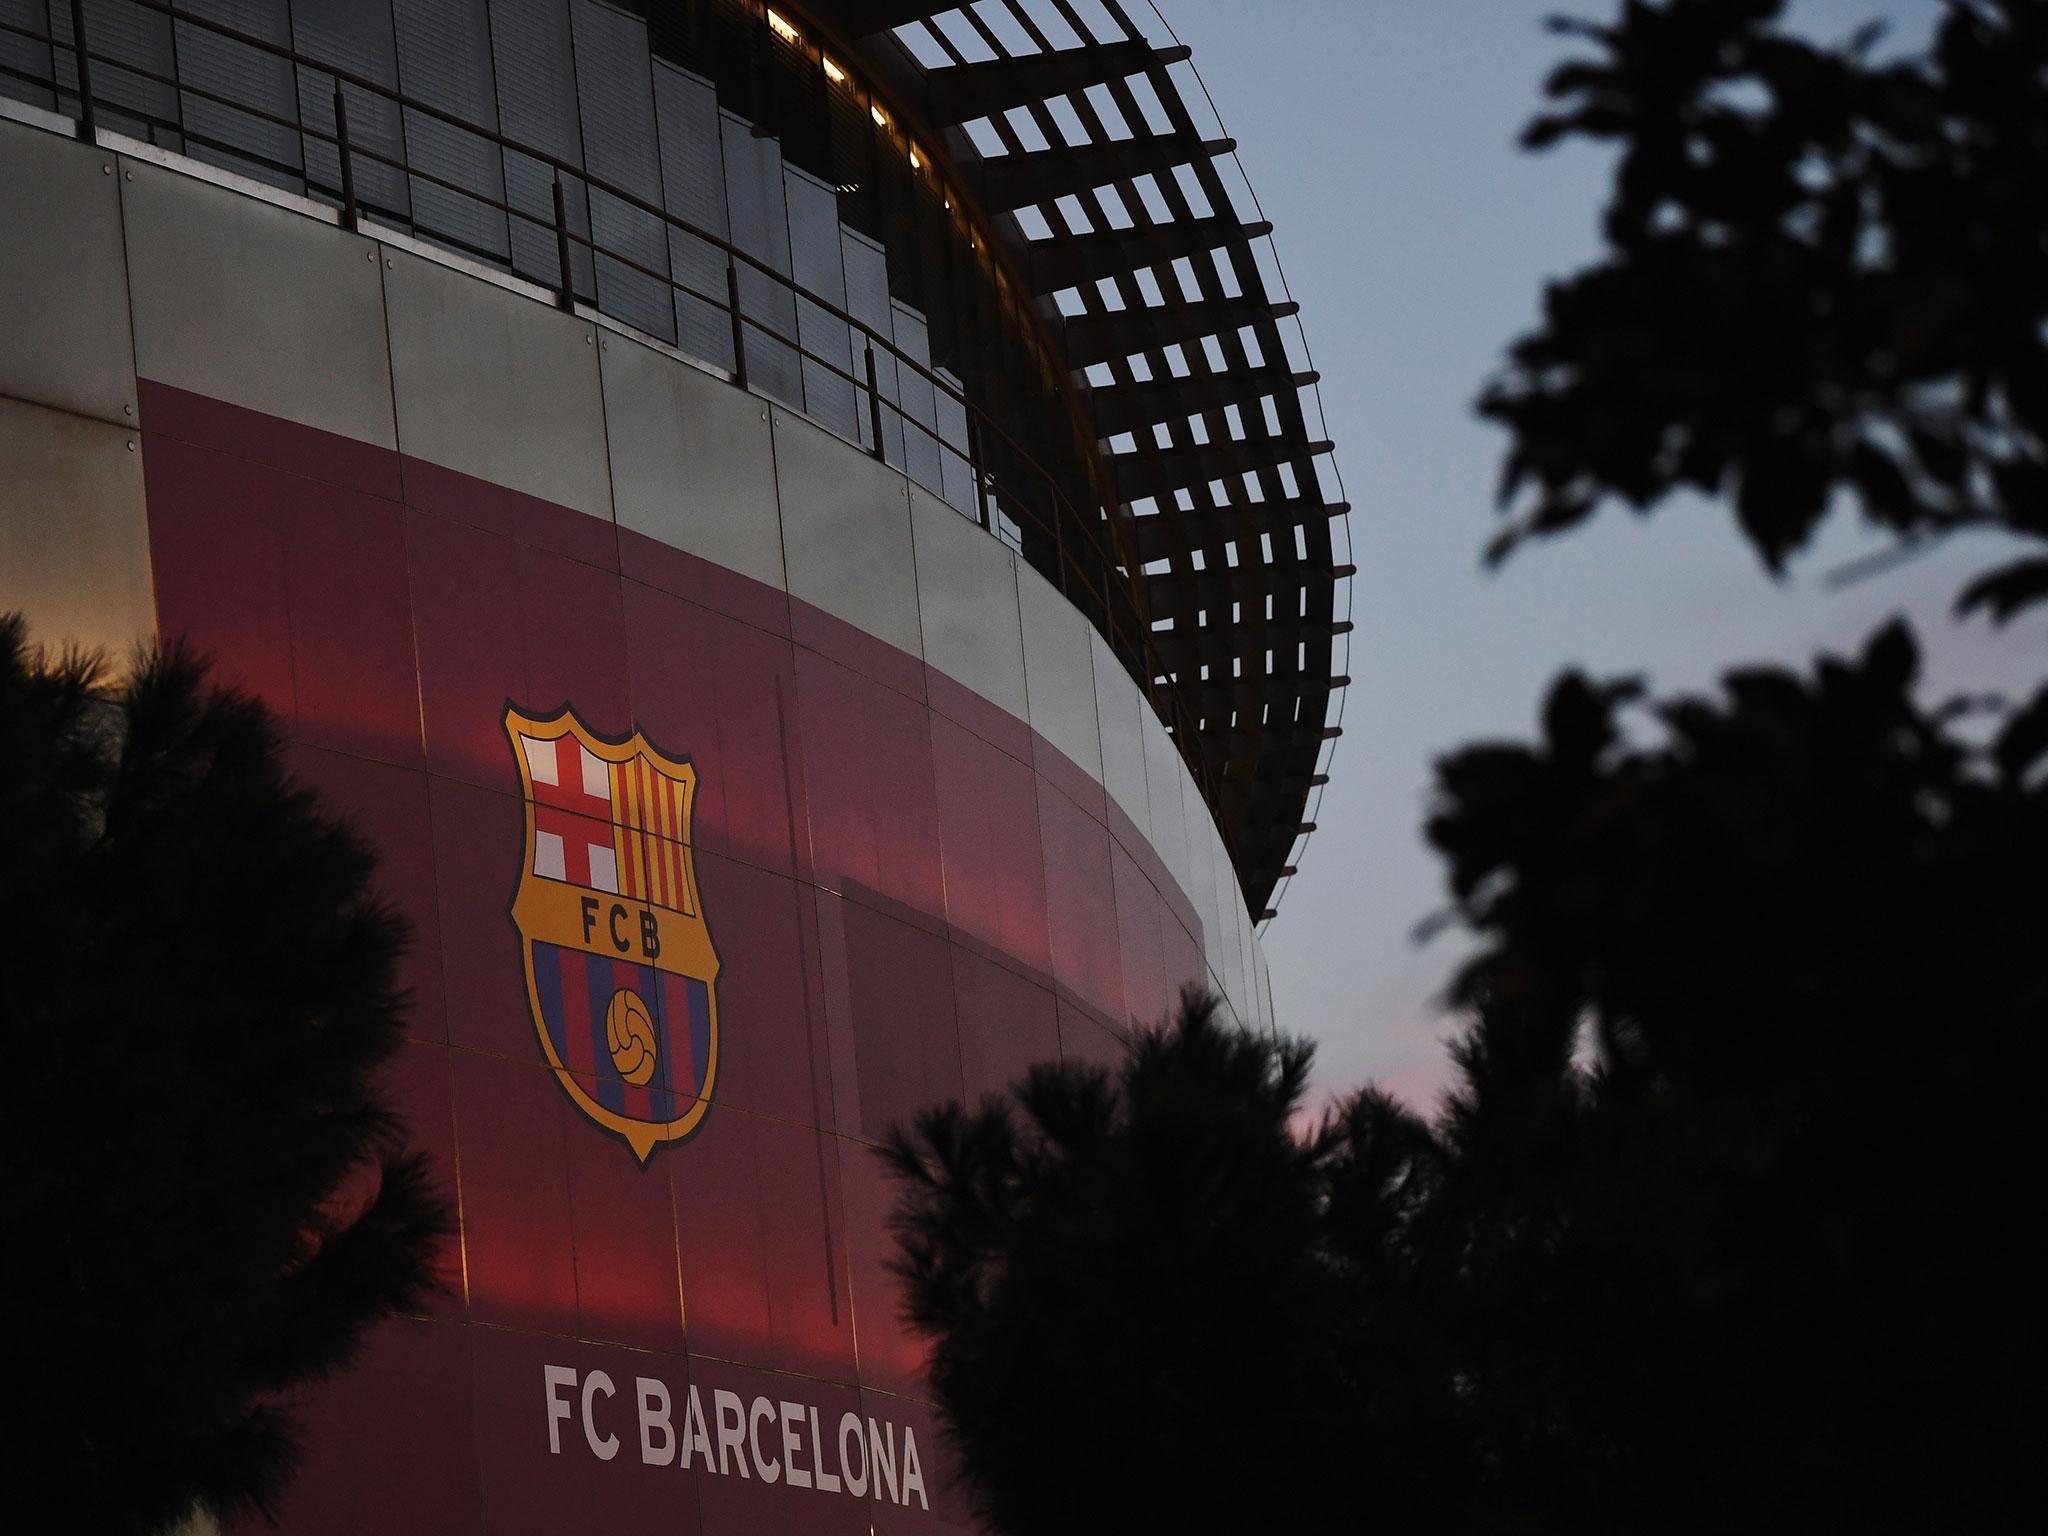 Police are investigating after Barcelona's B team beat an opponent 12-0 this weekend